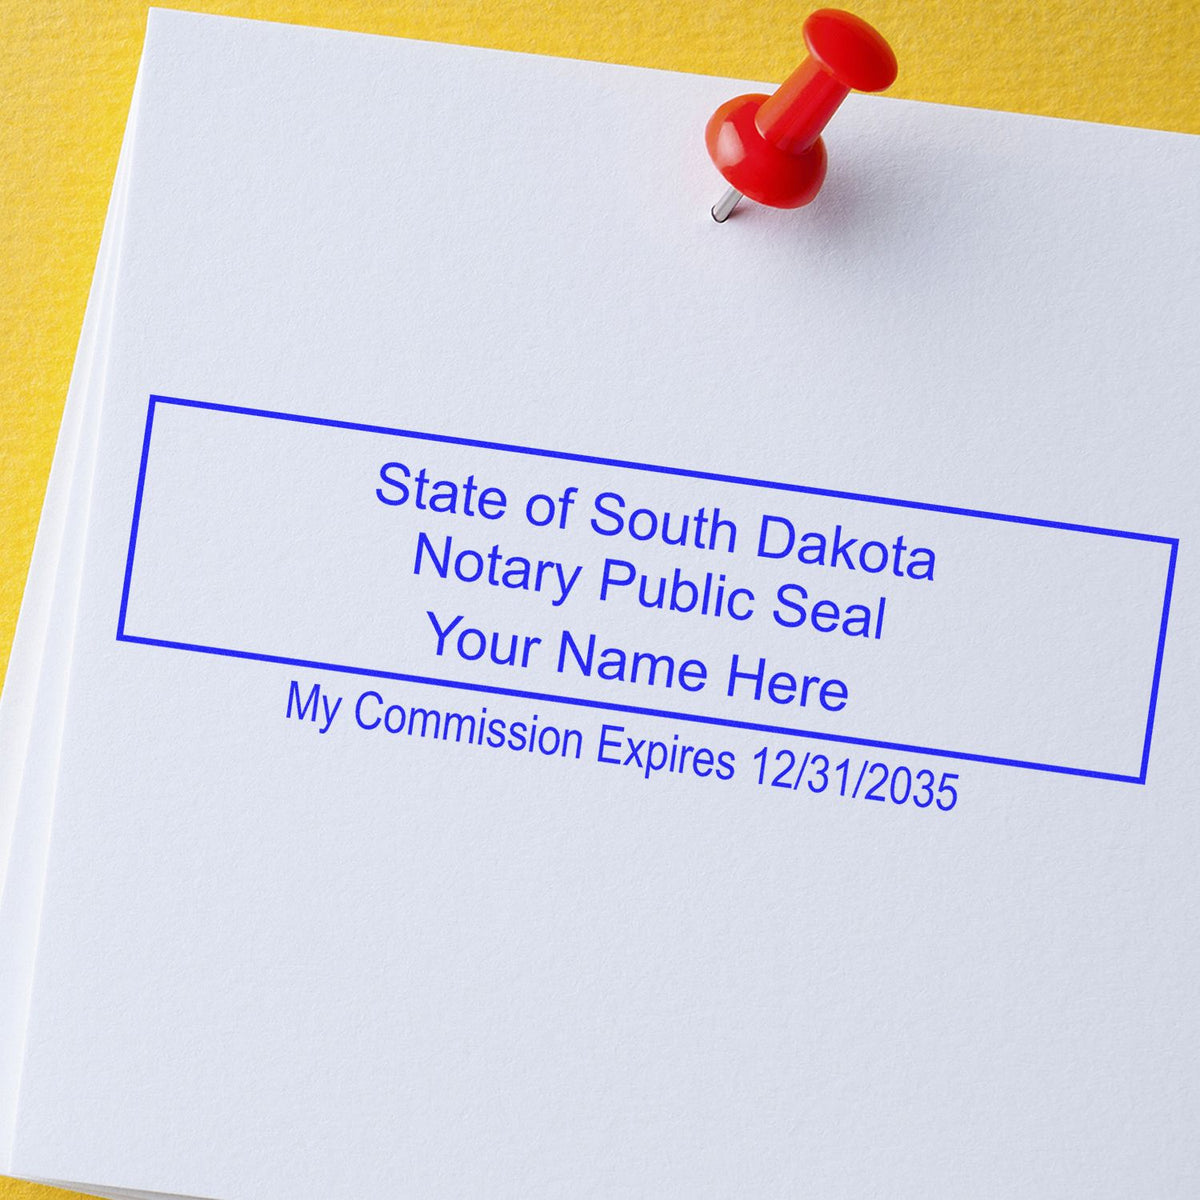 The PSI South Dakota Notary Stamp stamp impression comes to life with a crisp, detailed photo on paper - showcasing true professional quality.